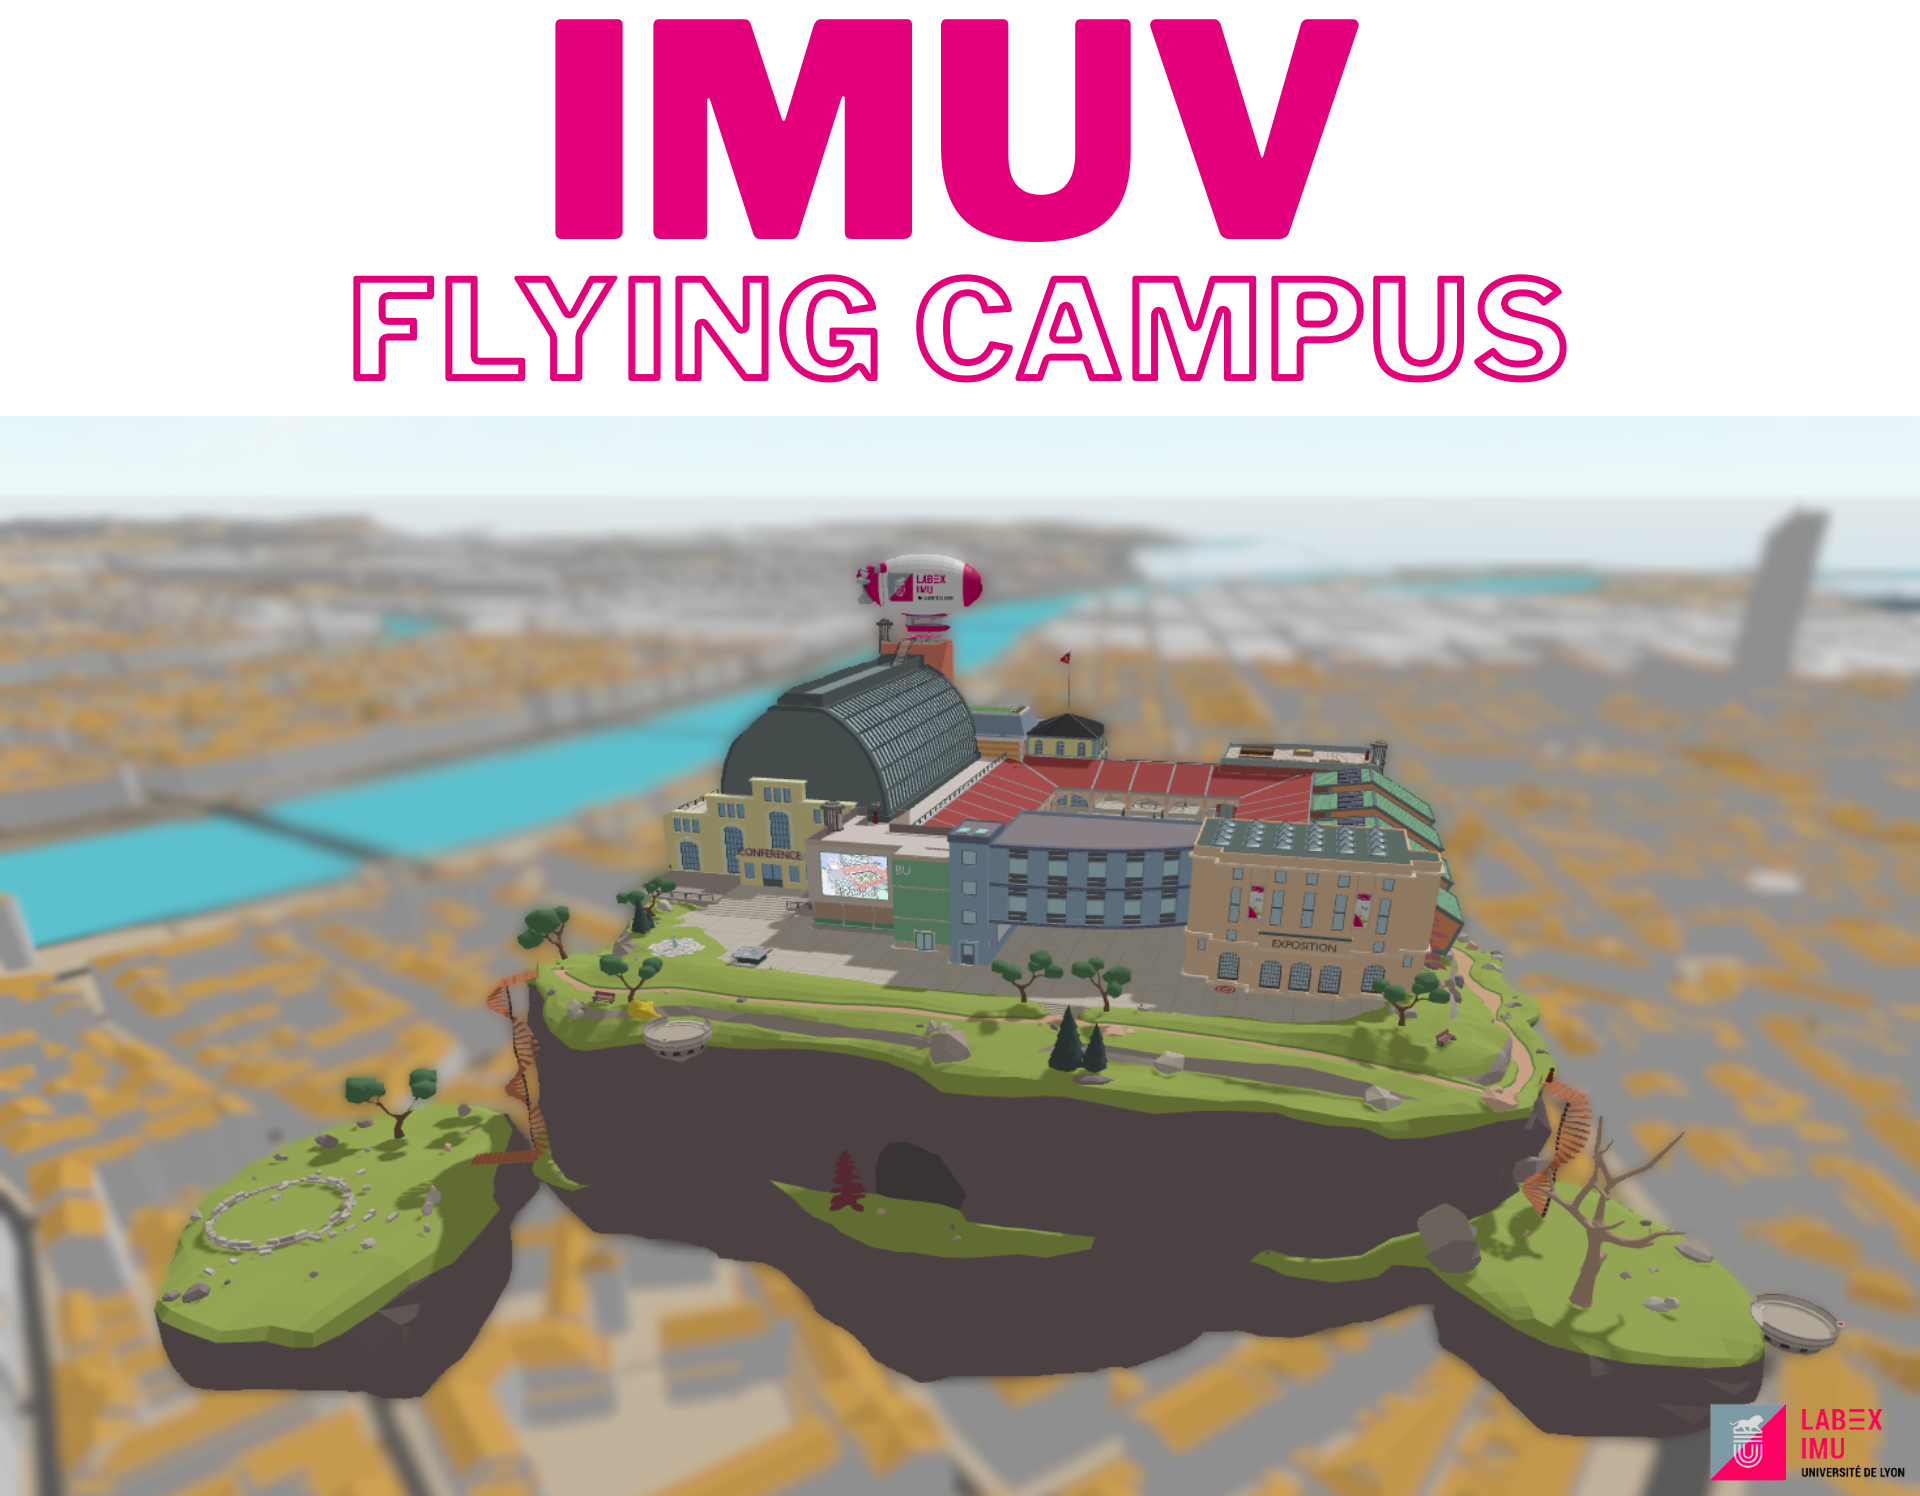 Flying campus